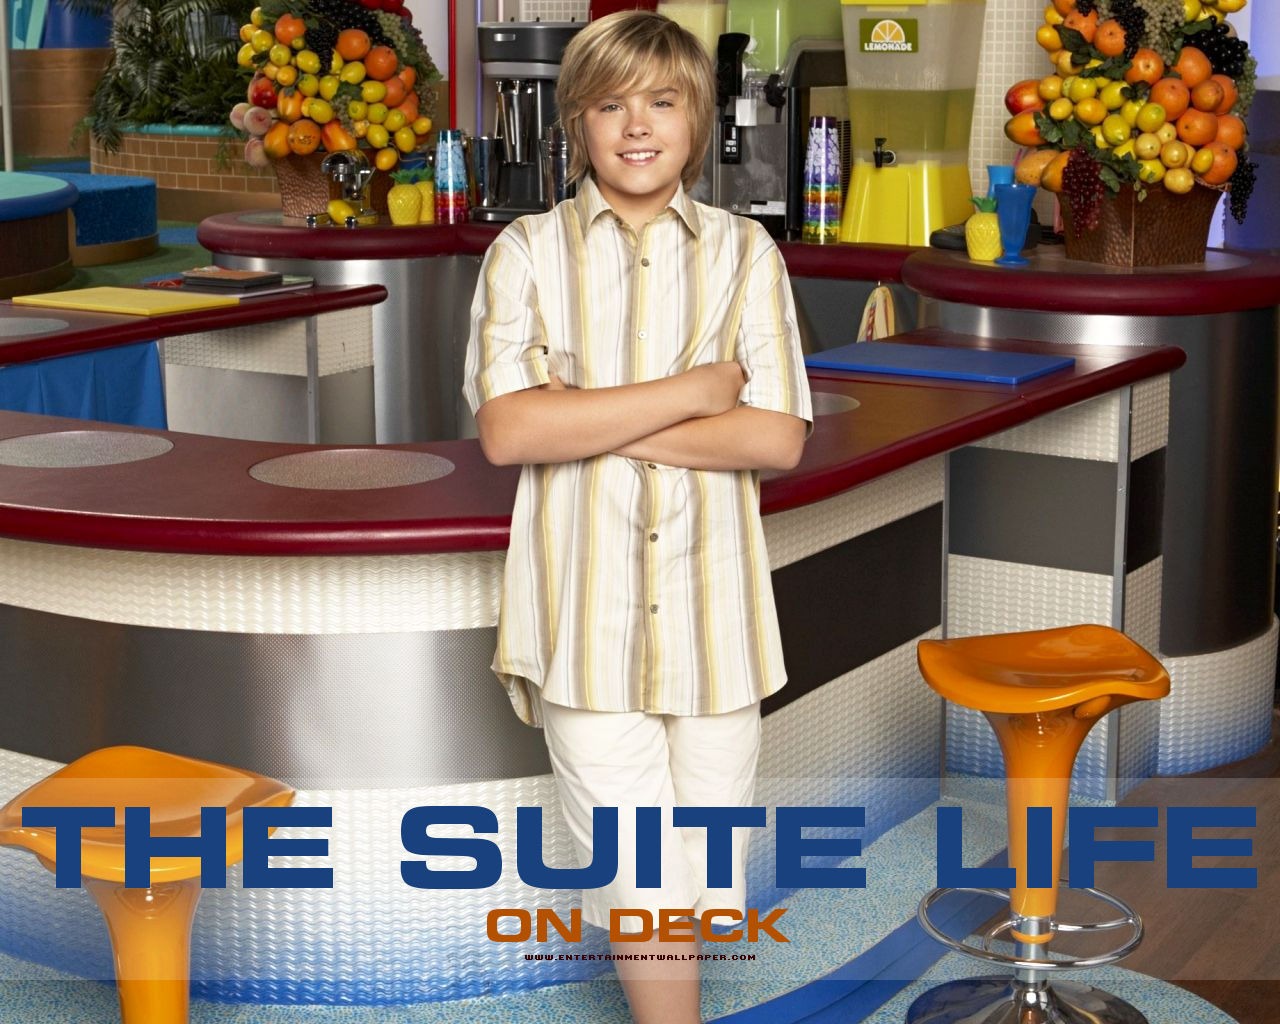 The Suite Life on Deck 甲板上的套房生活7 - 1280x1024